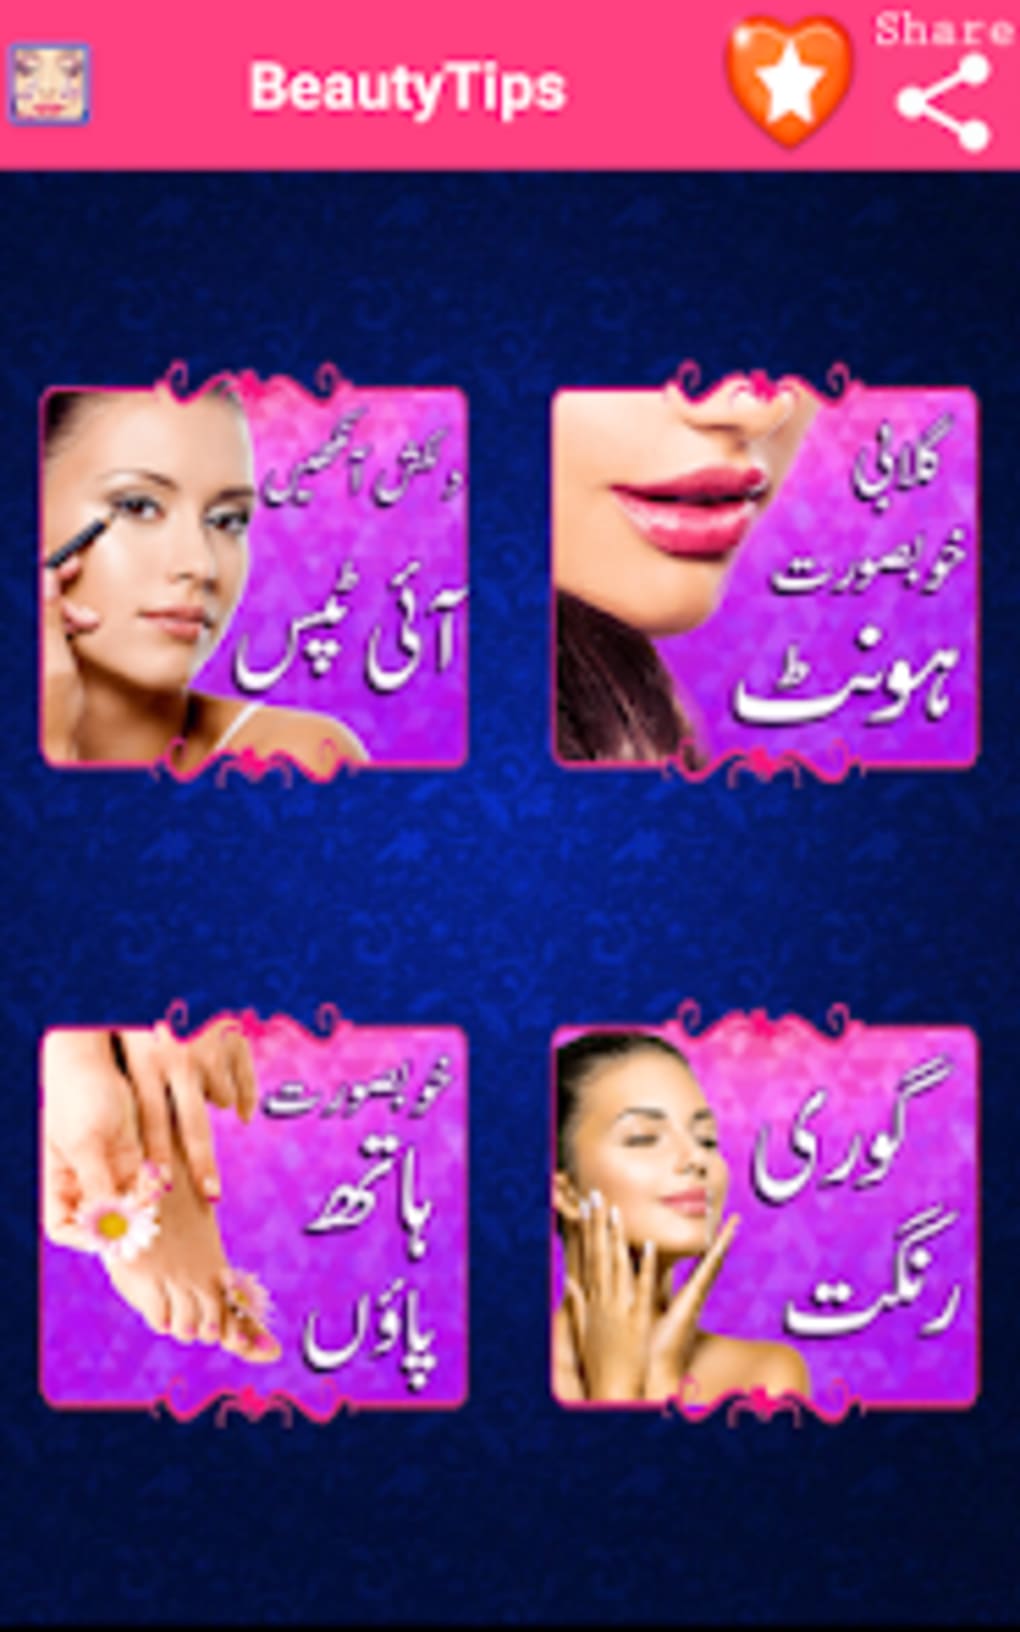 Beauty Tips In Urdu For Android